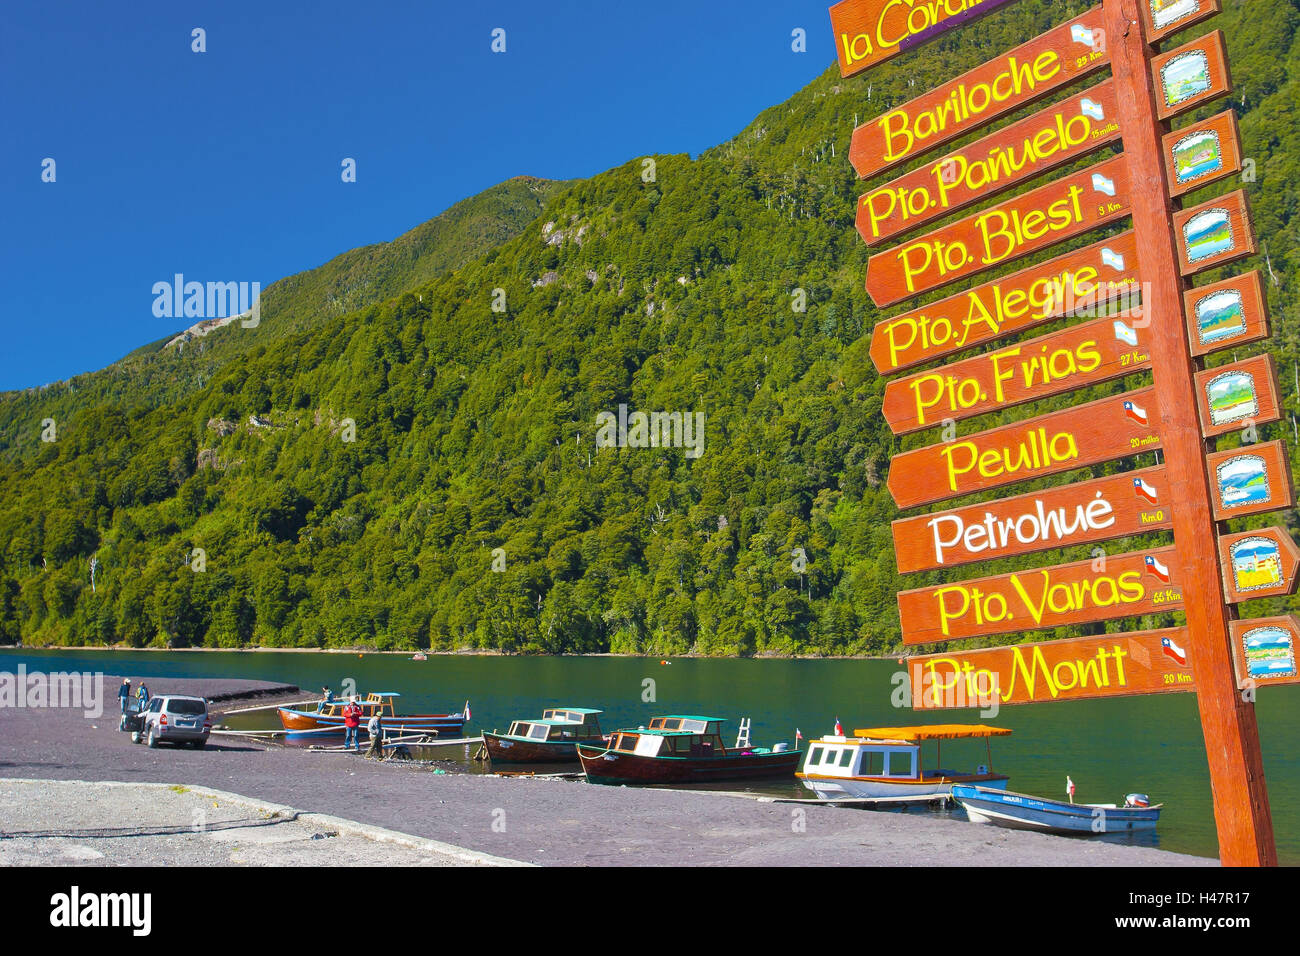 South America, Chile, Patagonia, national park Petrohue, marina, pier, signpost, harbours in Chile and Argentina, Stock Photo